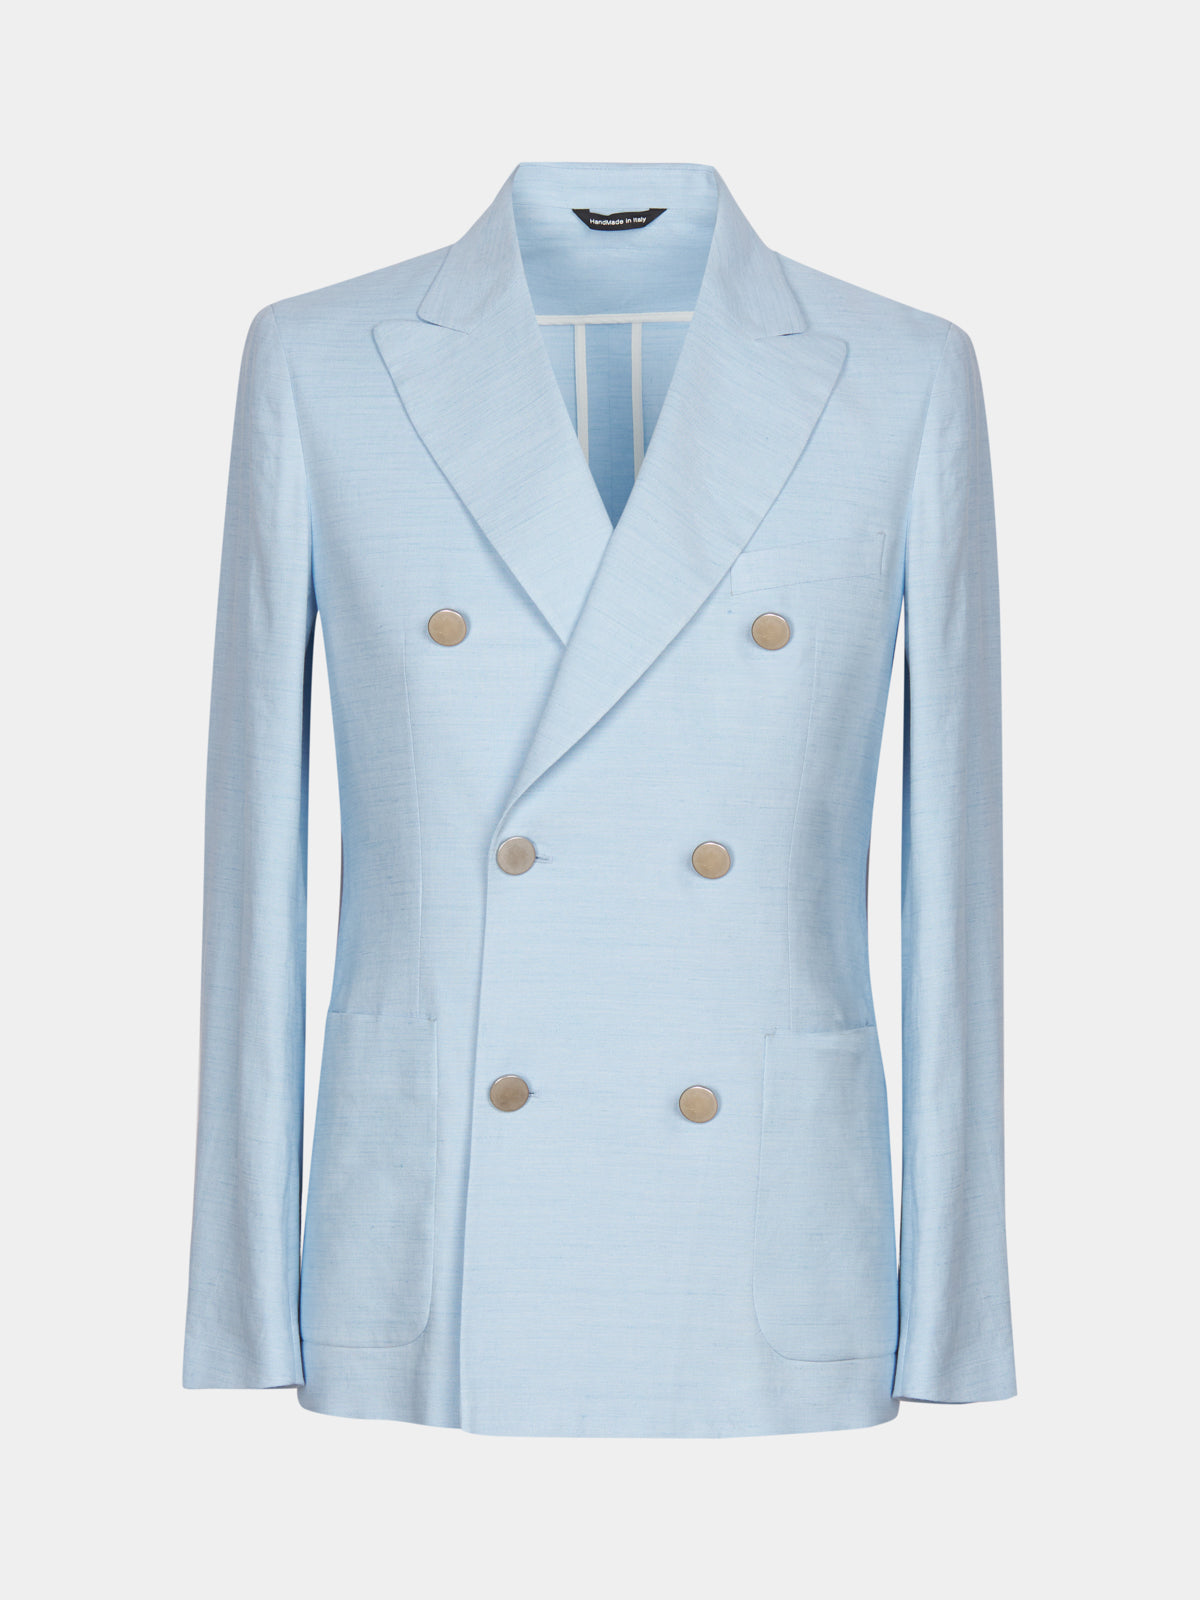 Double-breasted jacket in light blue linen